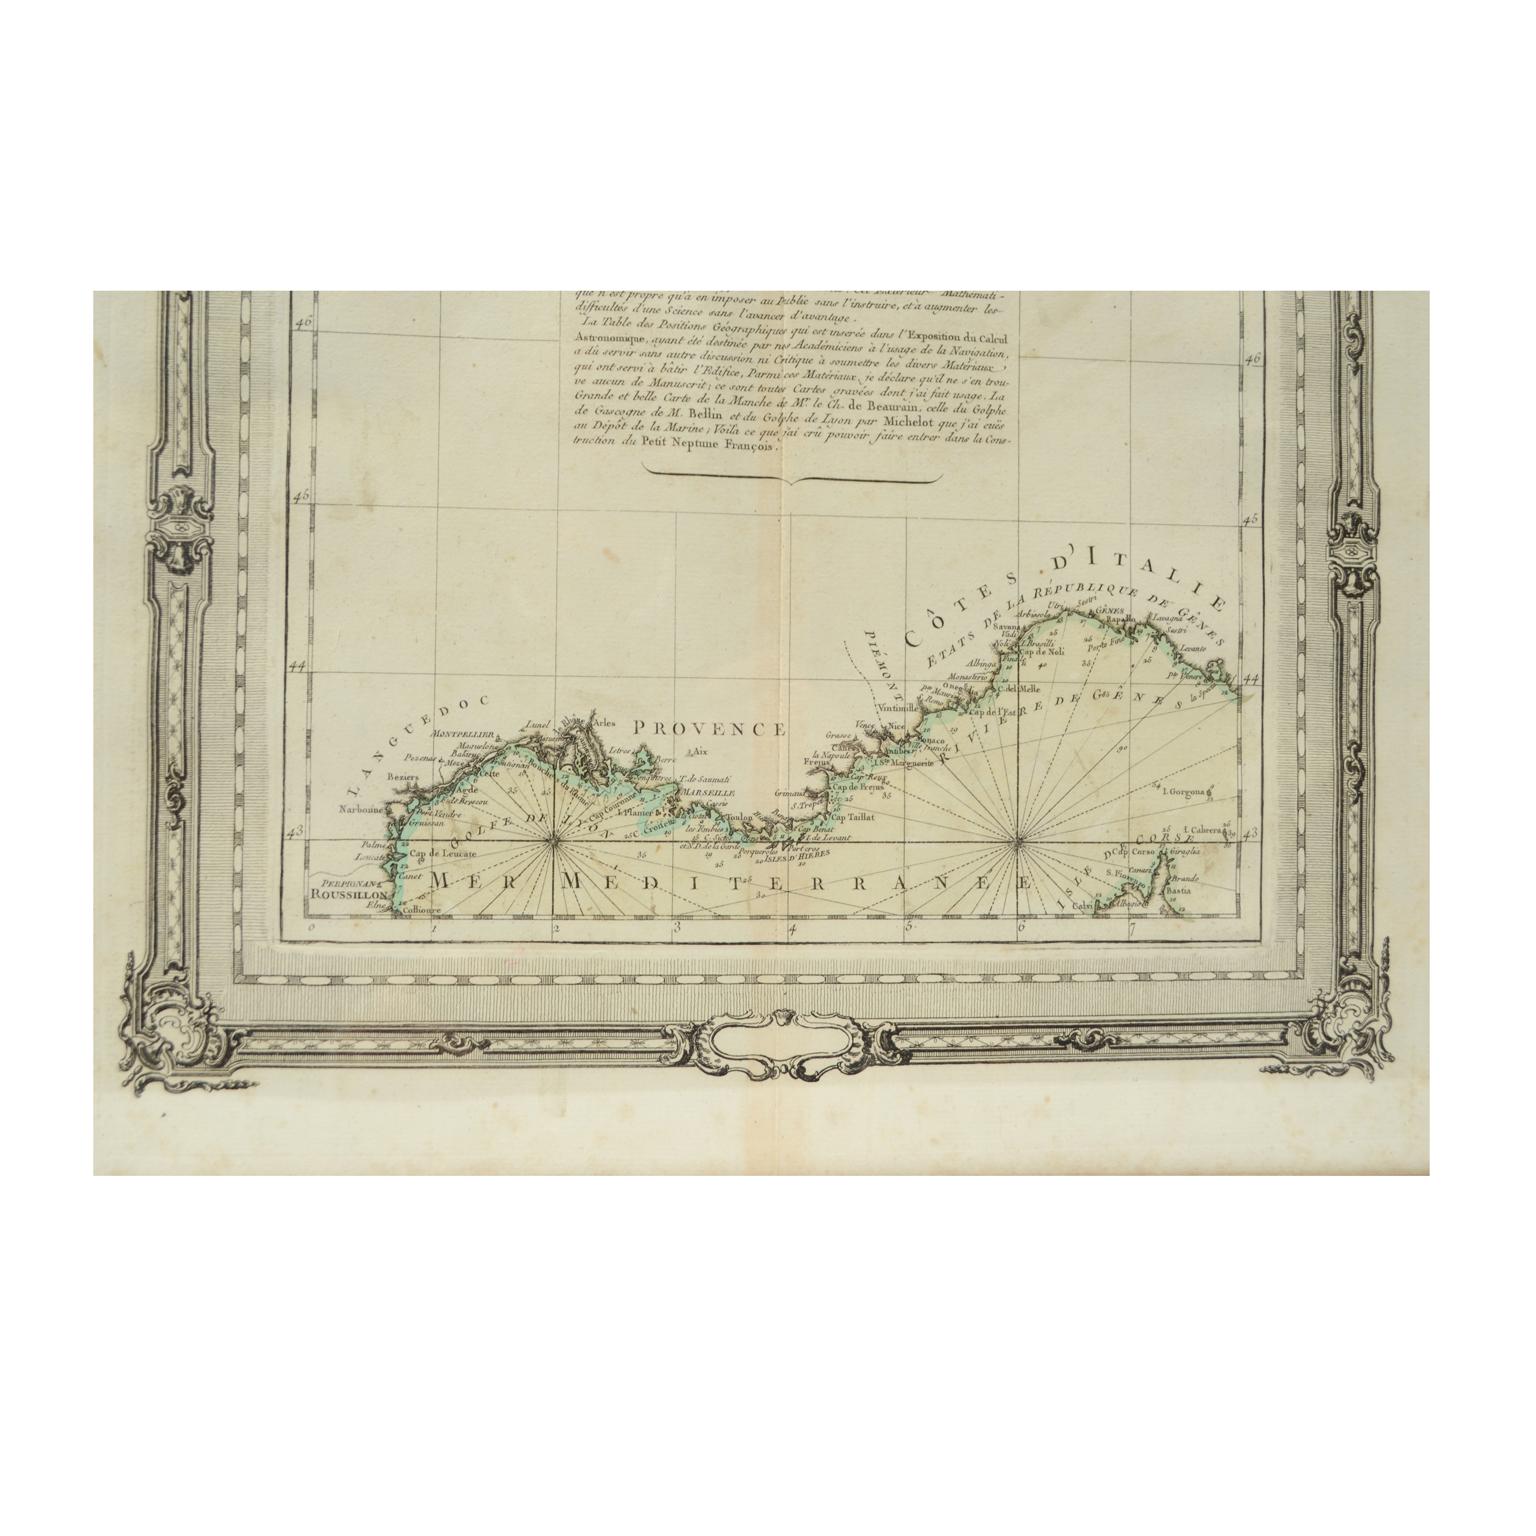 French Nautical Map of the Mediterranean Sea from  Le petit Neptune françois, 1763